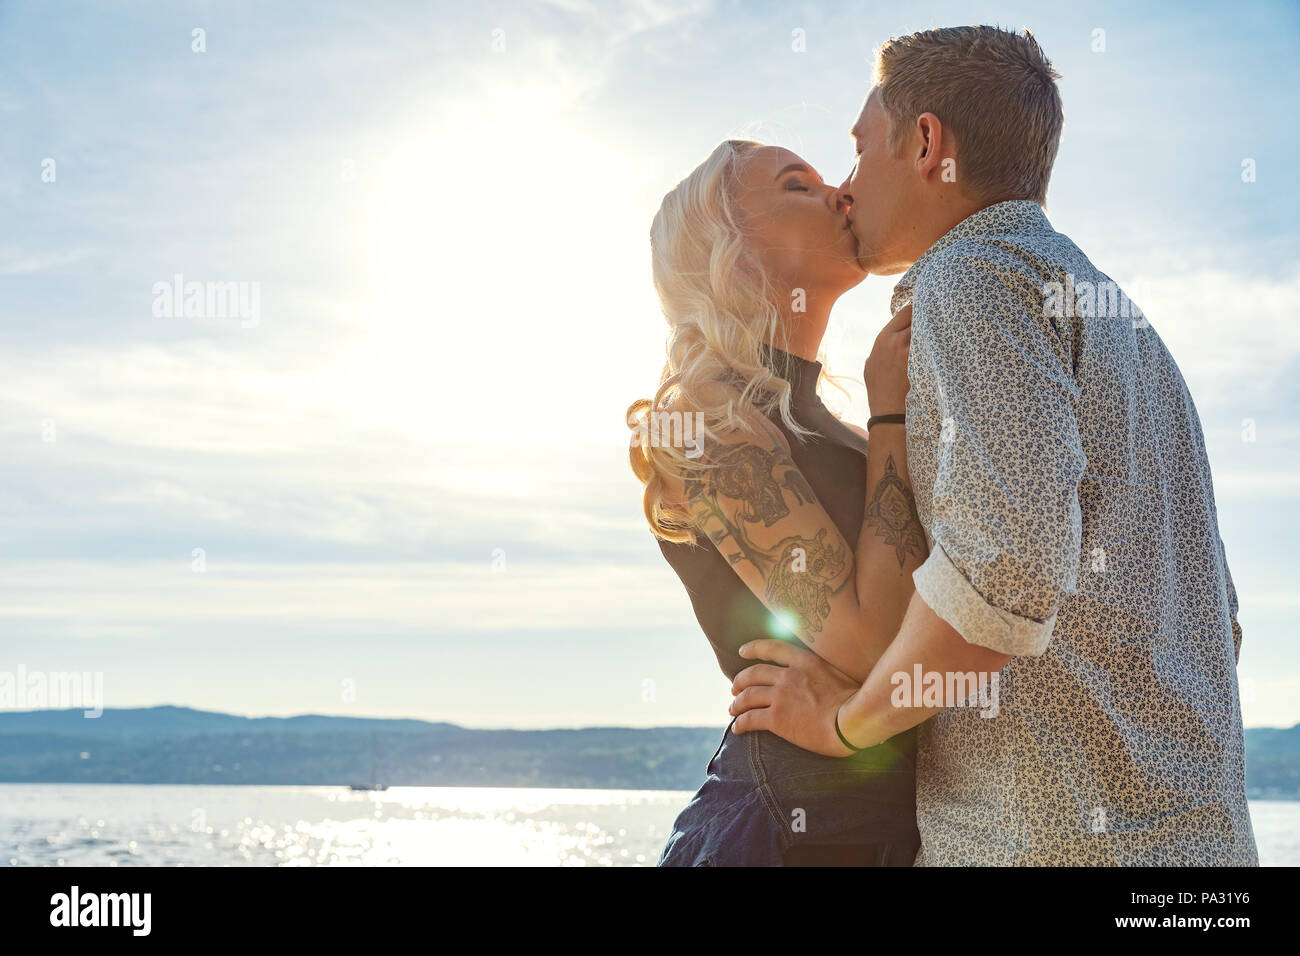 Romantic couple kissing and embrace on beach a sunny day Stock Photo